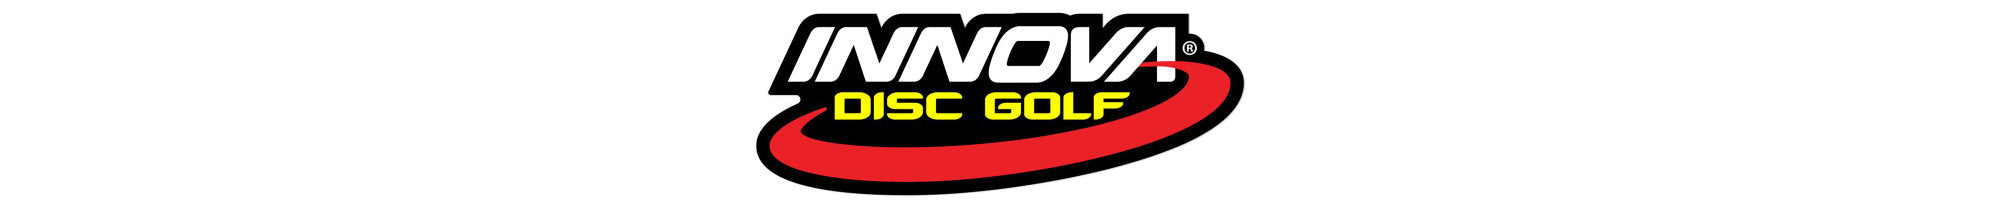 All Innova - Select to View Color Options